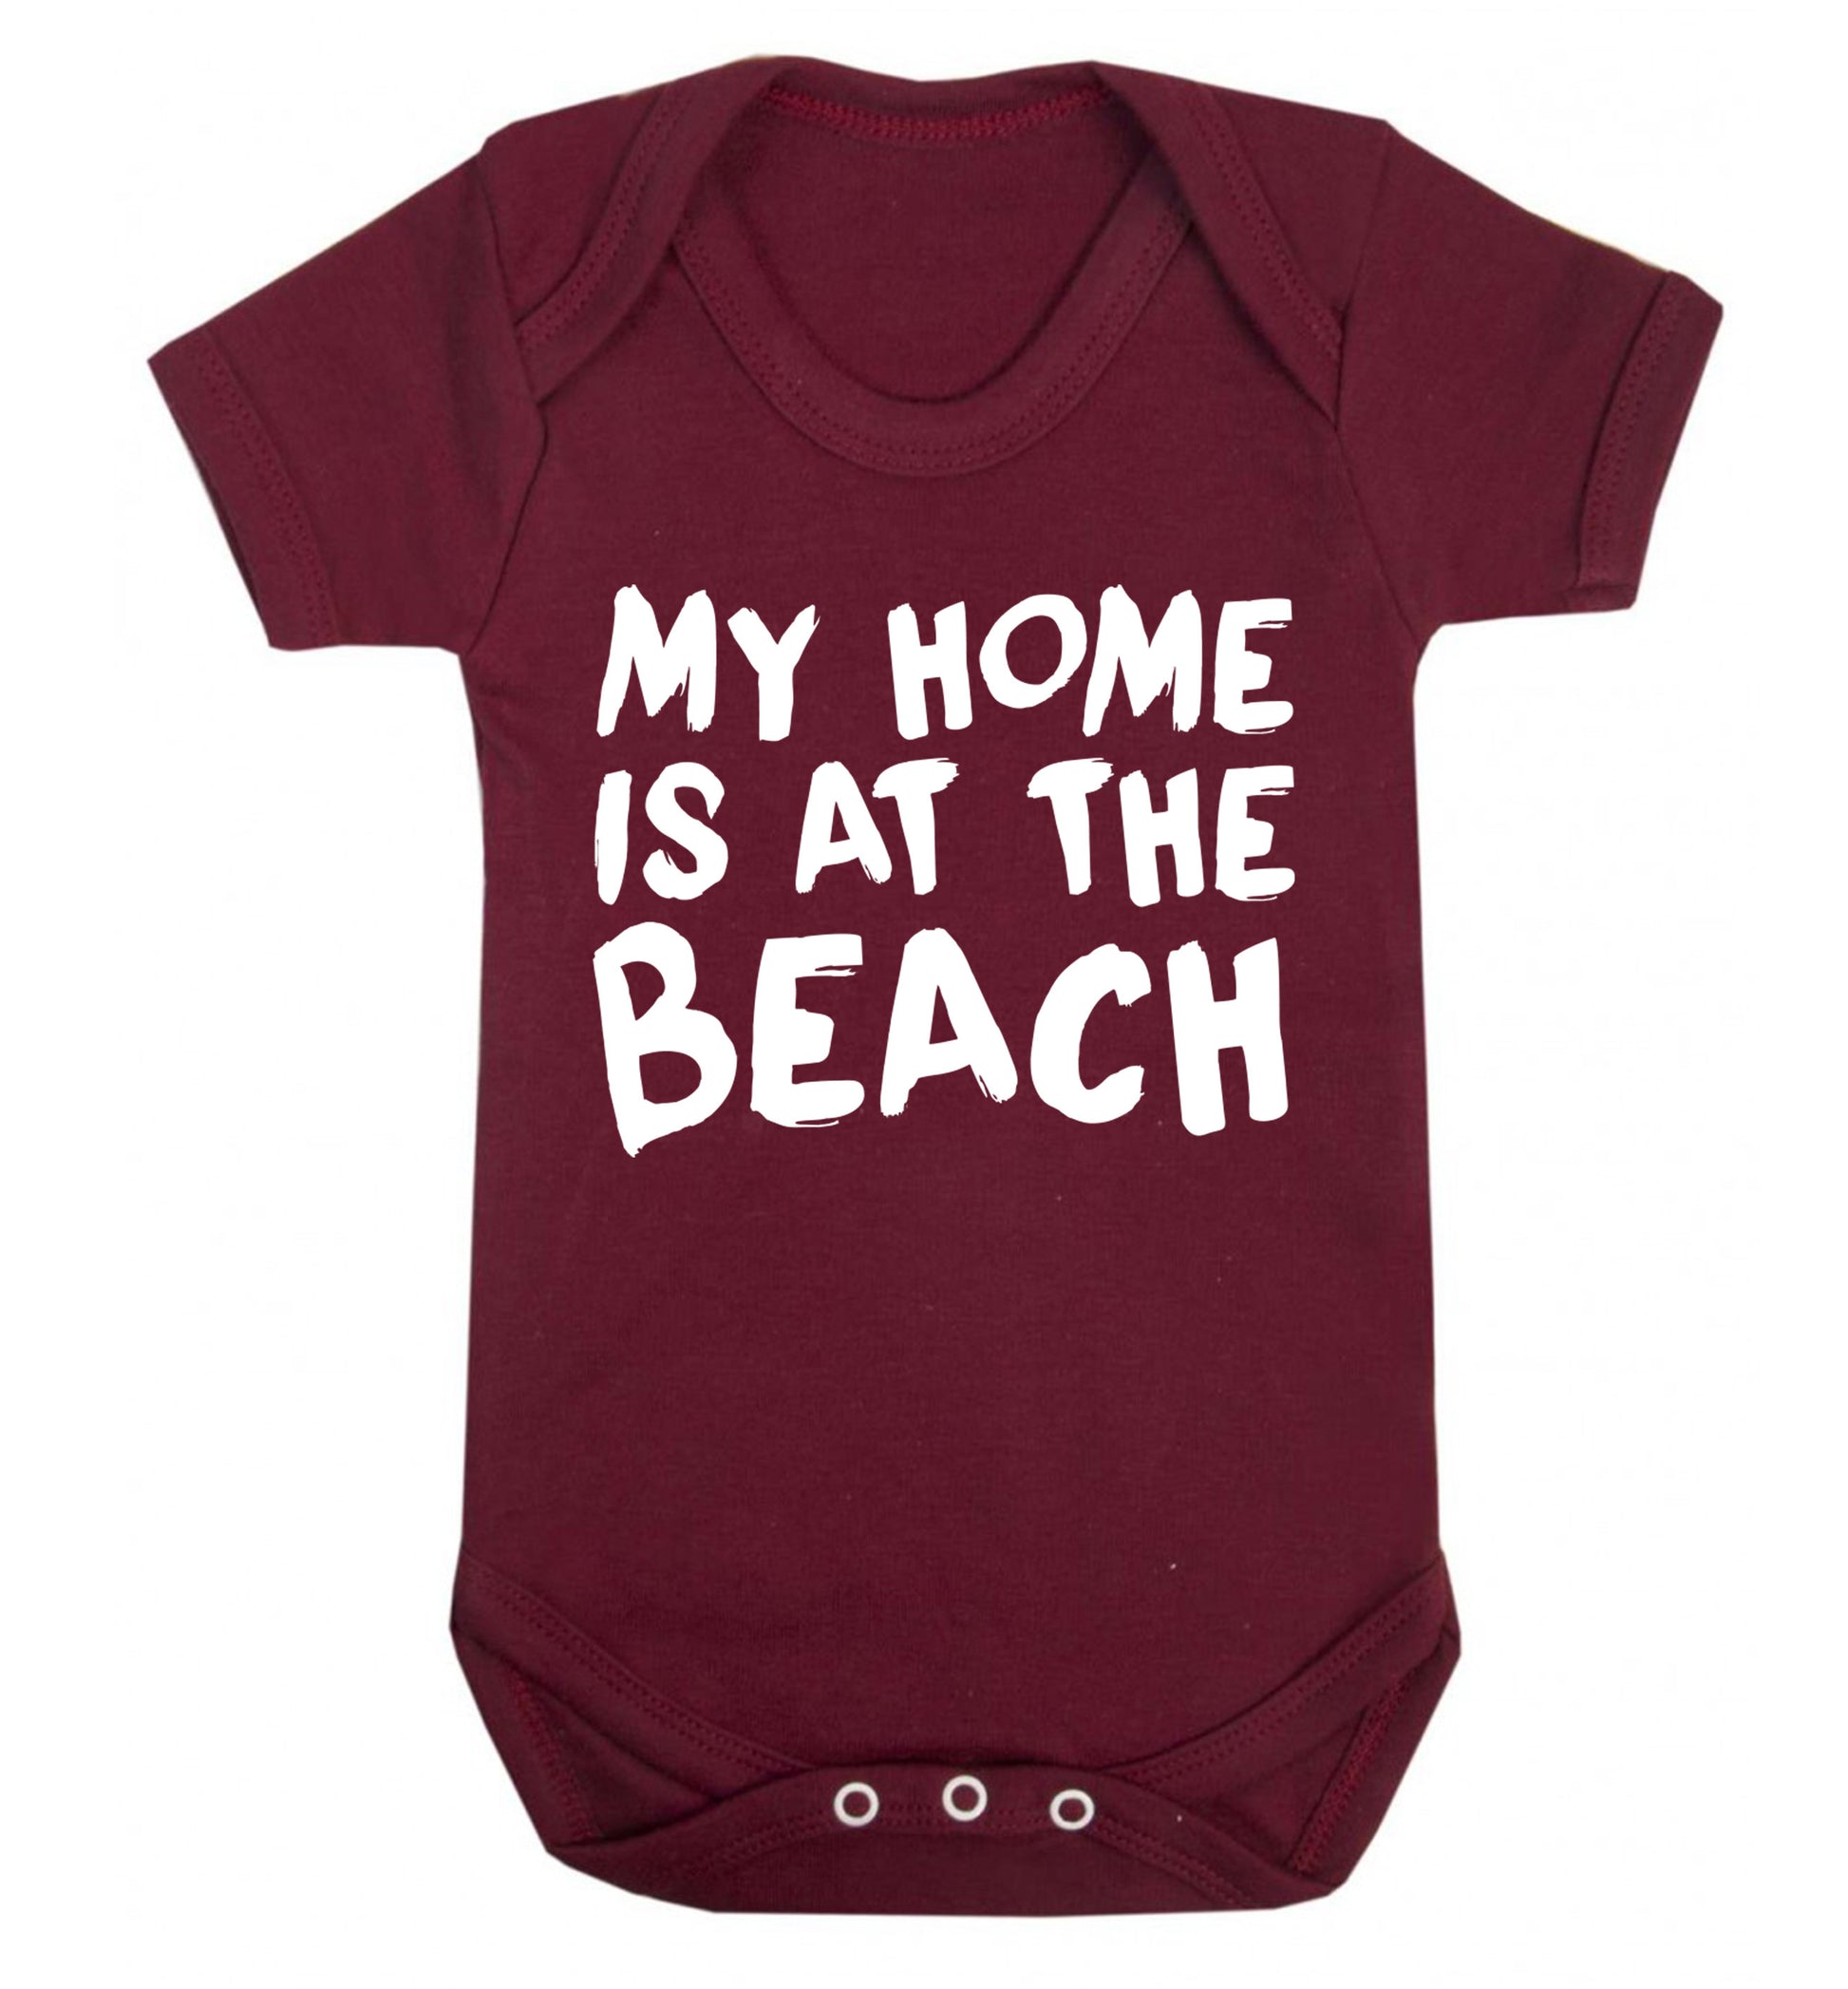 My home is at the beach Baby Vest maroon 18-24 months